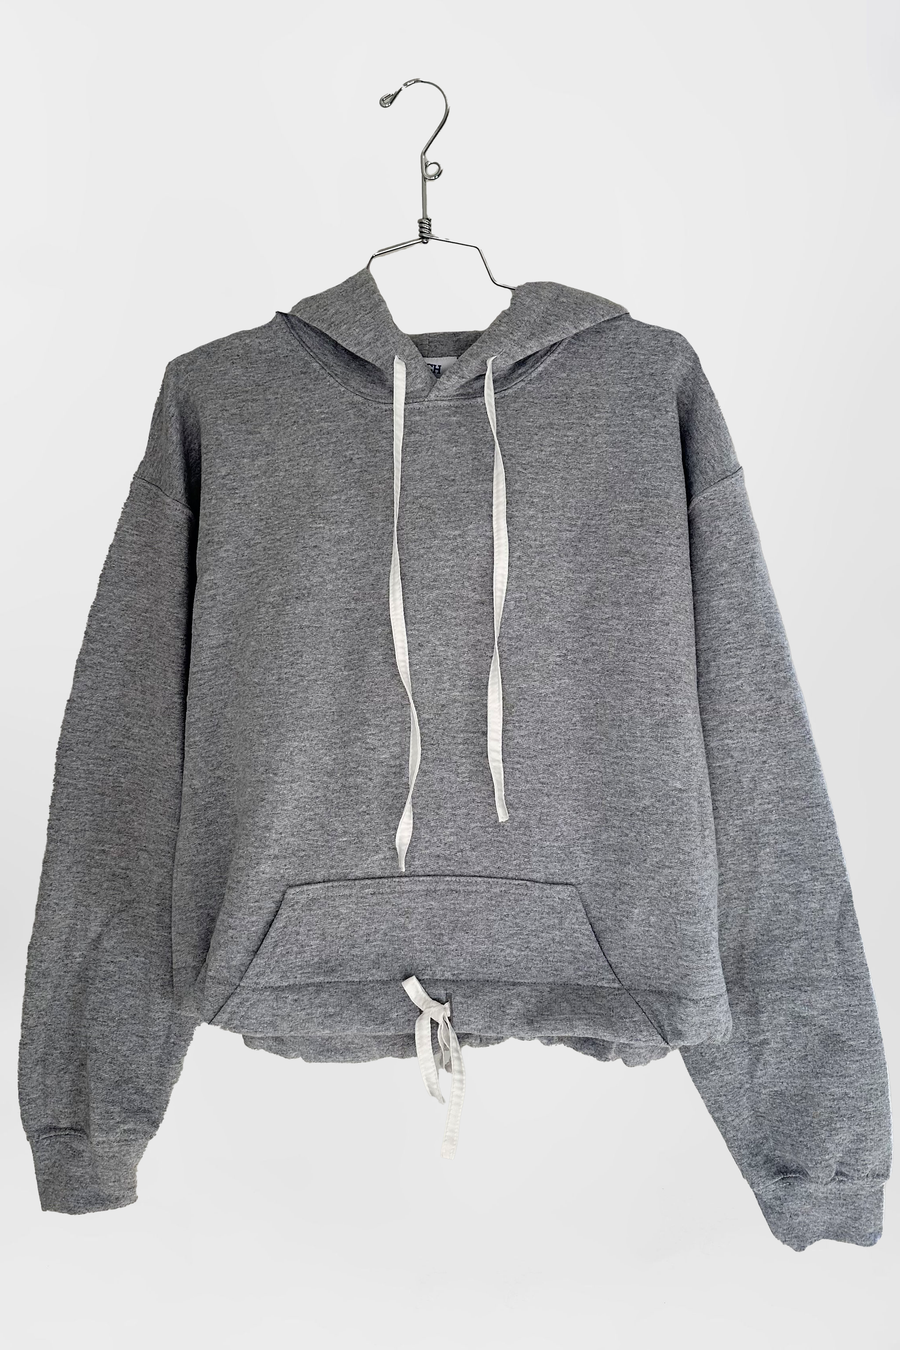 Cropped Hoodie Grey *Limited*Edition*